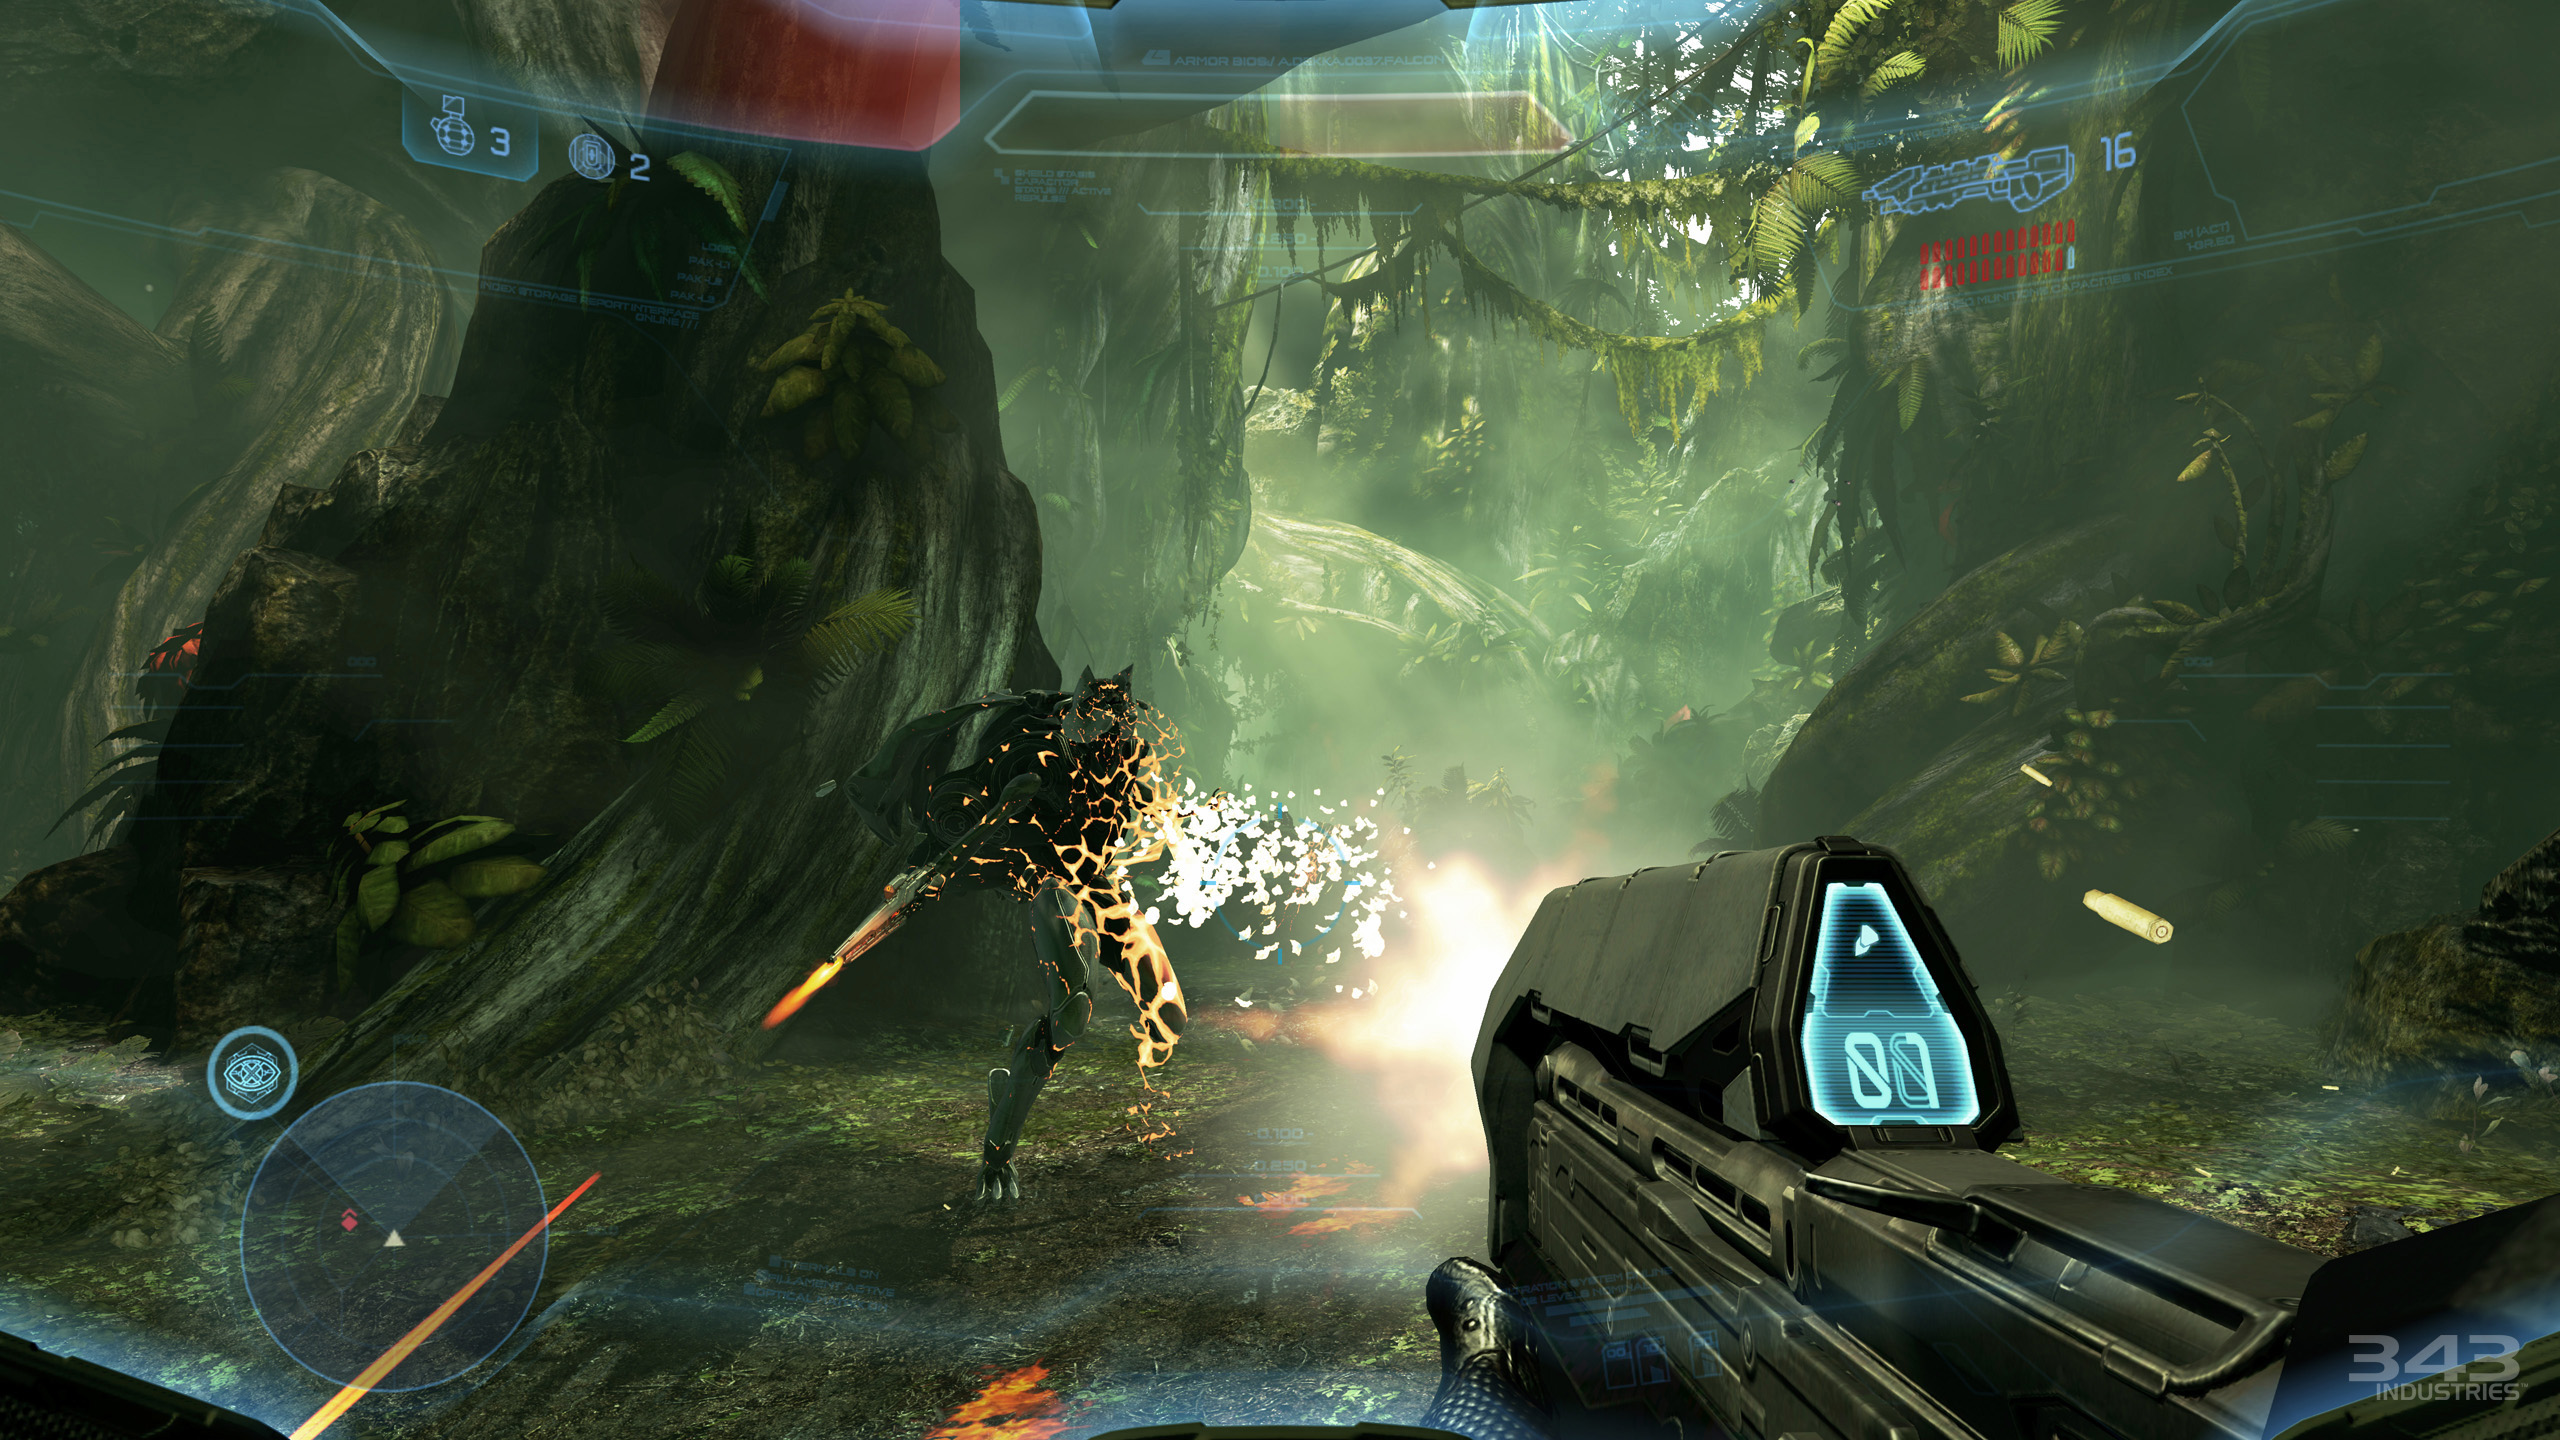 Halo 4 multiplayer will have join-in feature, netcode modified from Reach